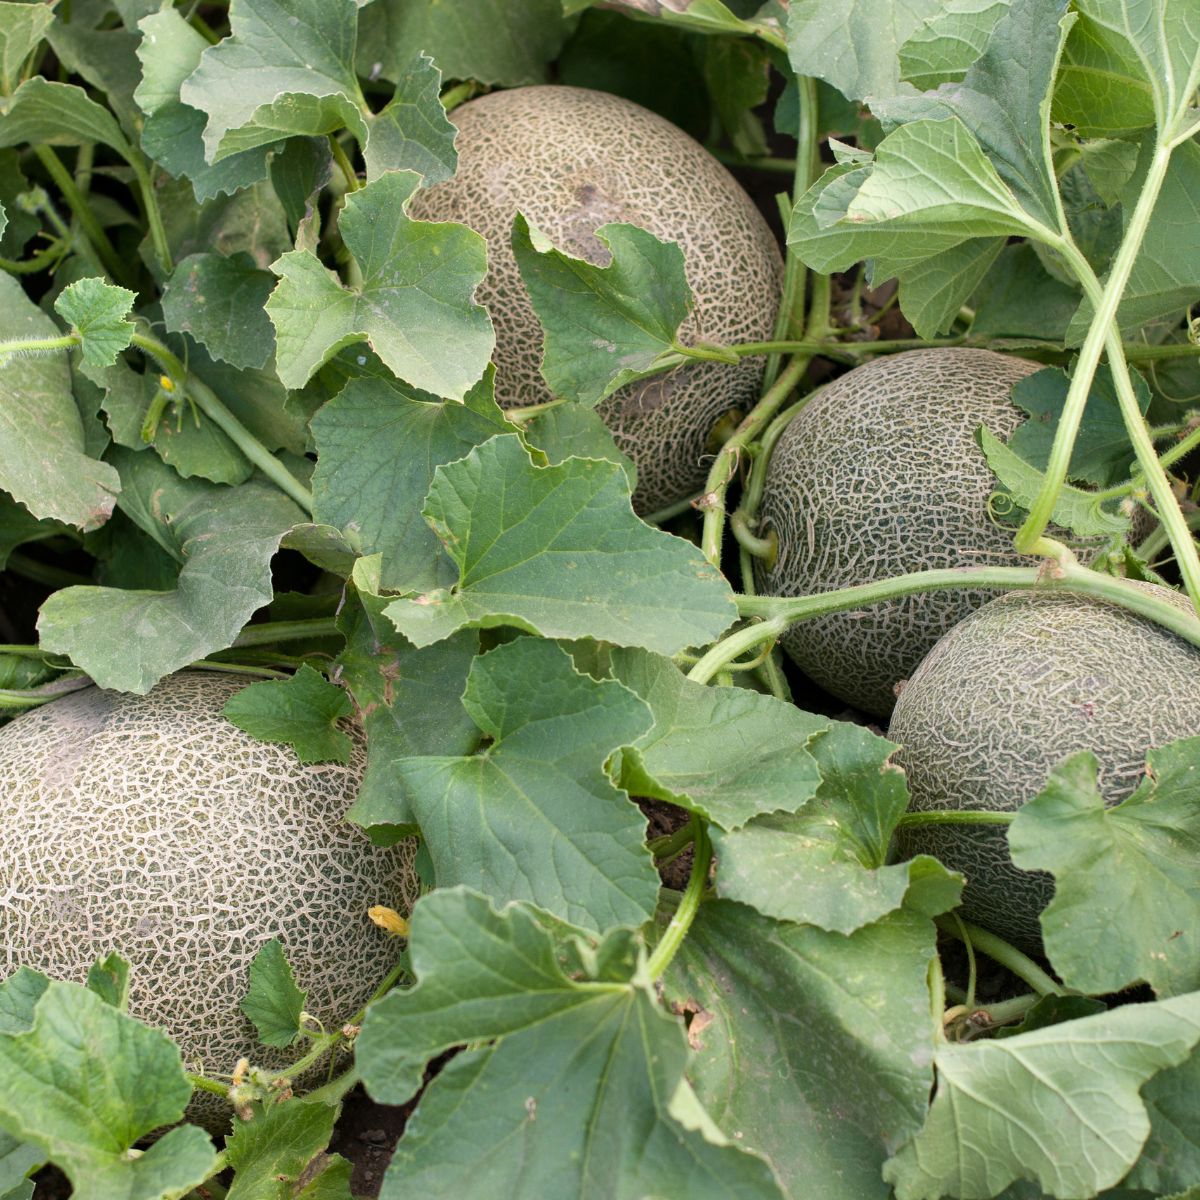 melons in the garden.